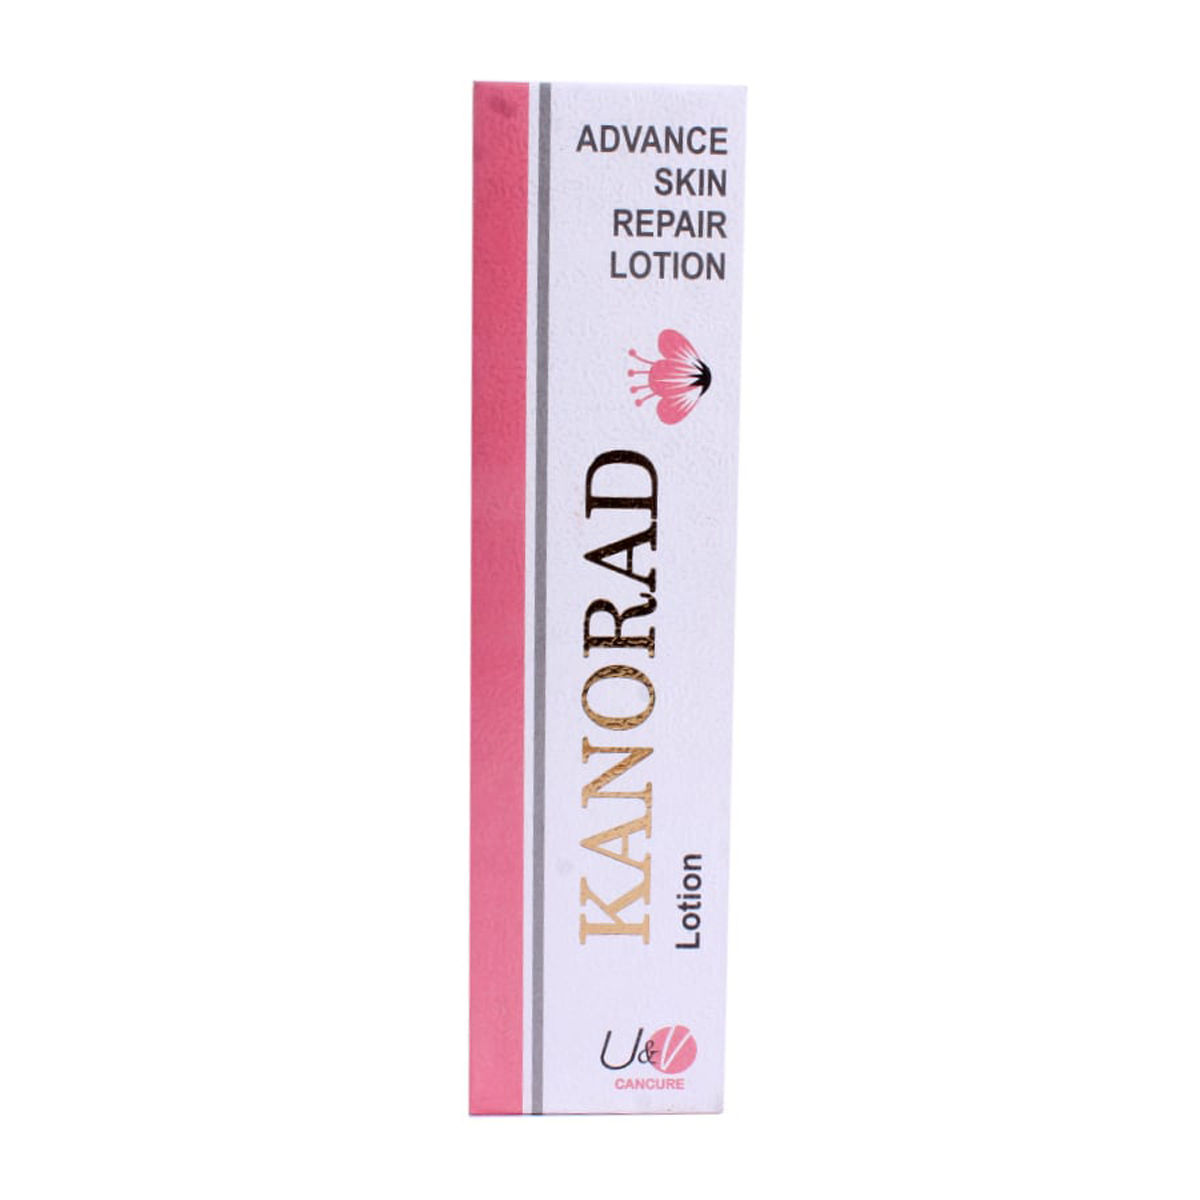 Kanorad Lotion 100Ml, Pack of 1 